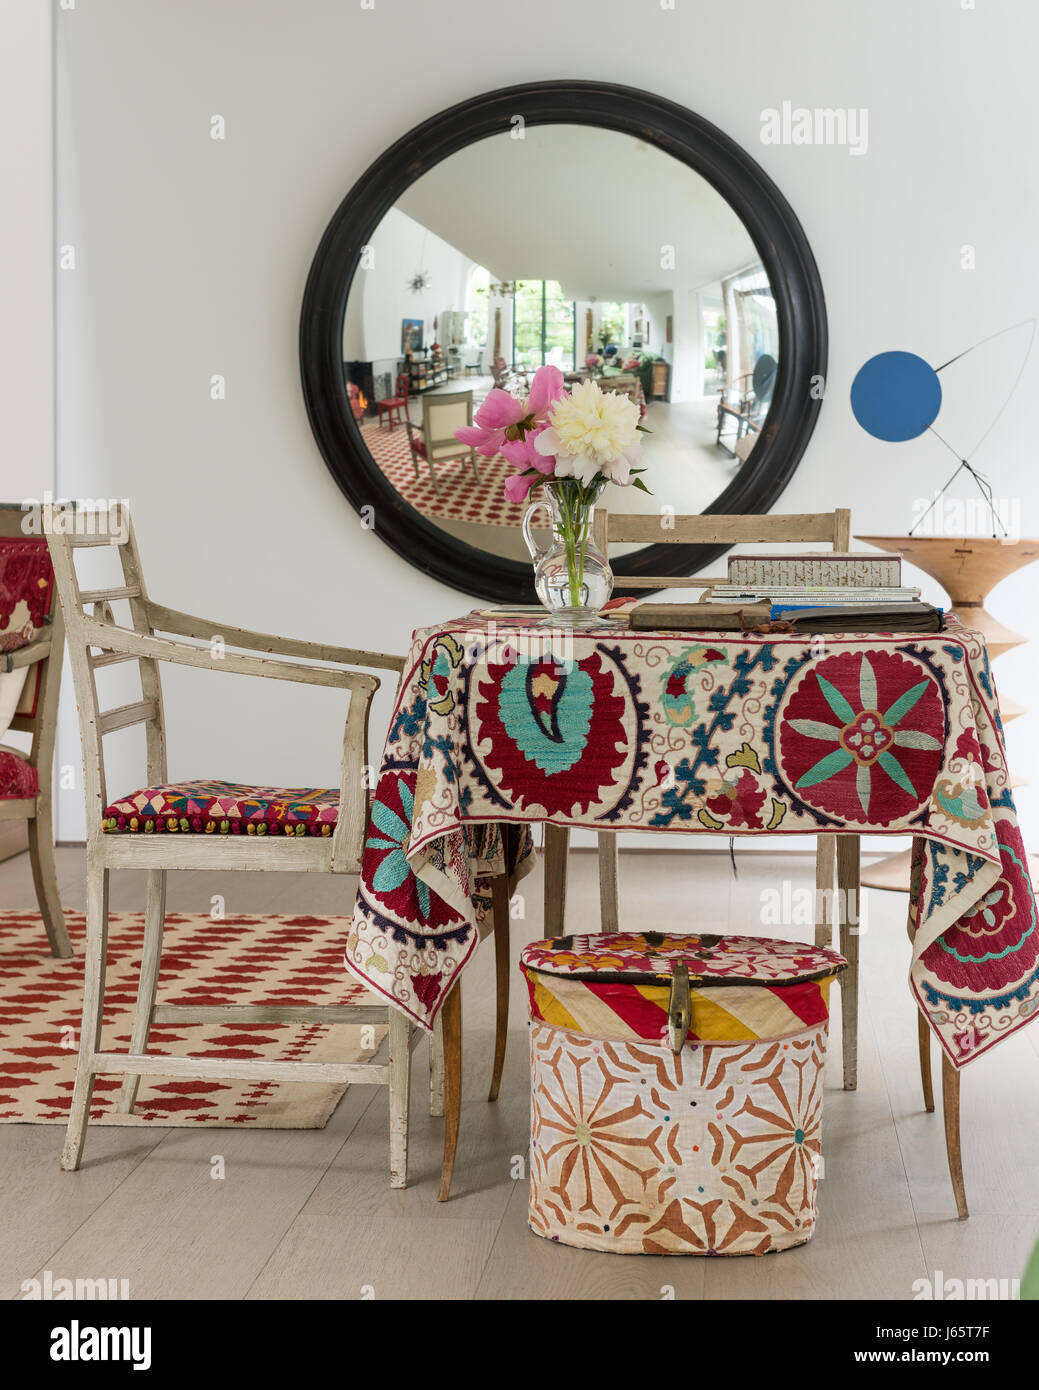 Large convex mirror with old textiles adding colour Stock Photo